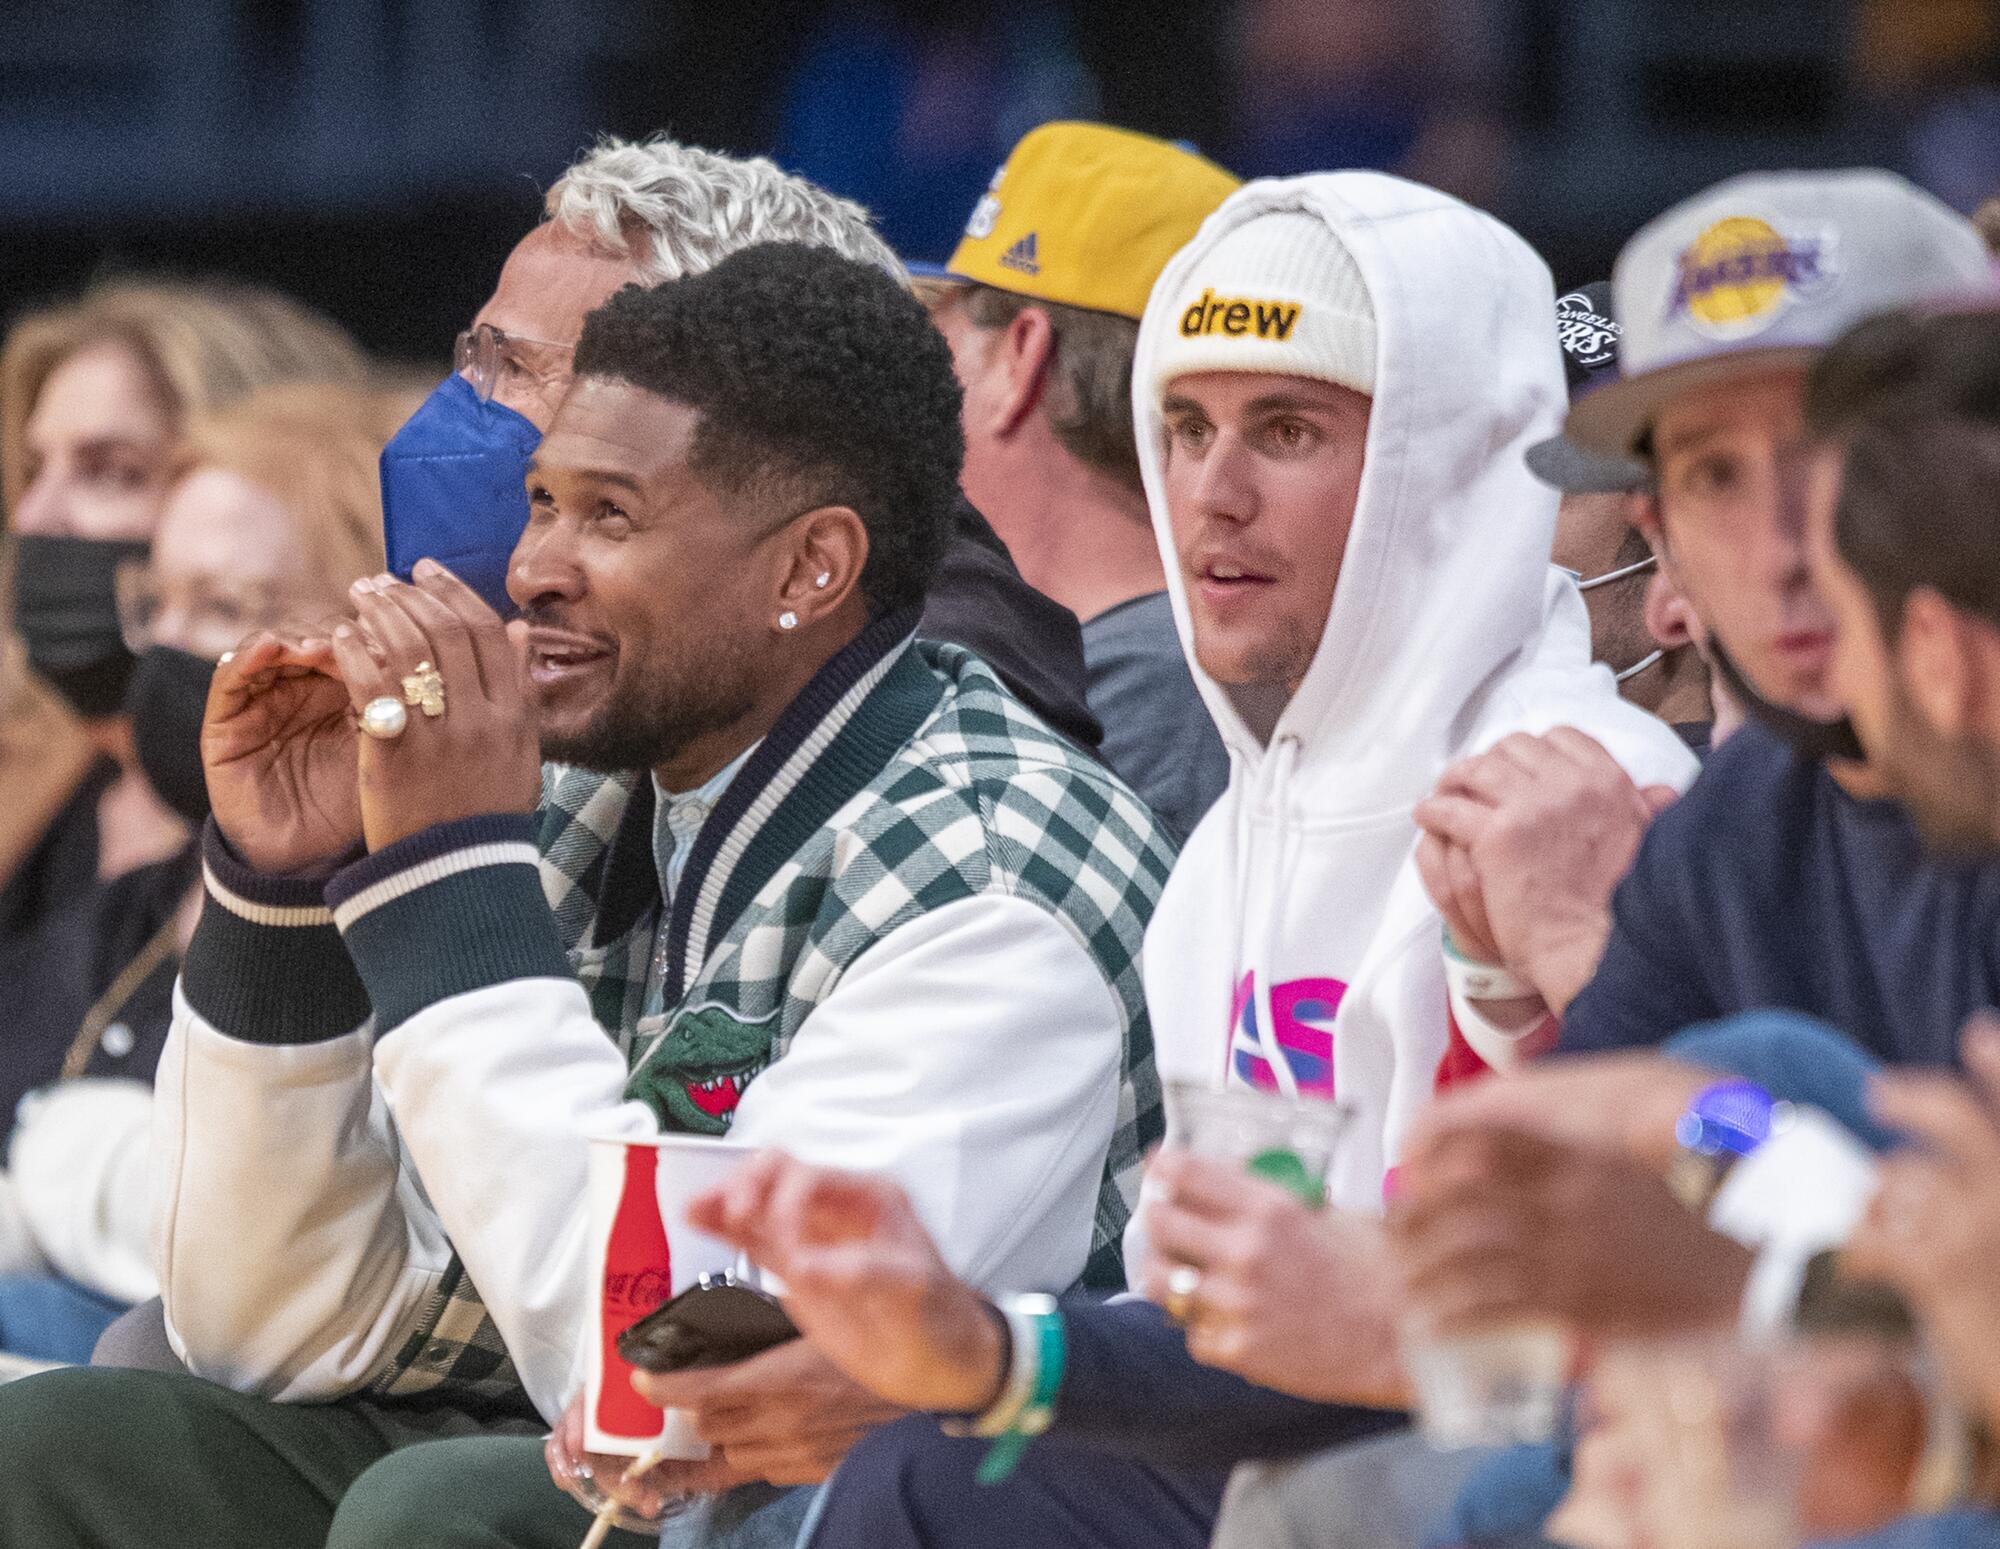 Usher and Justin Bieber in the crowd at Staples Center